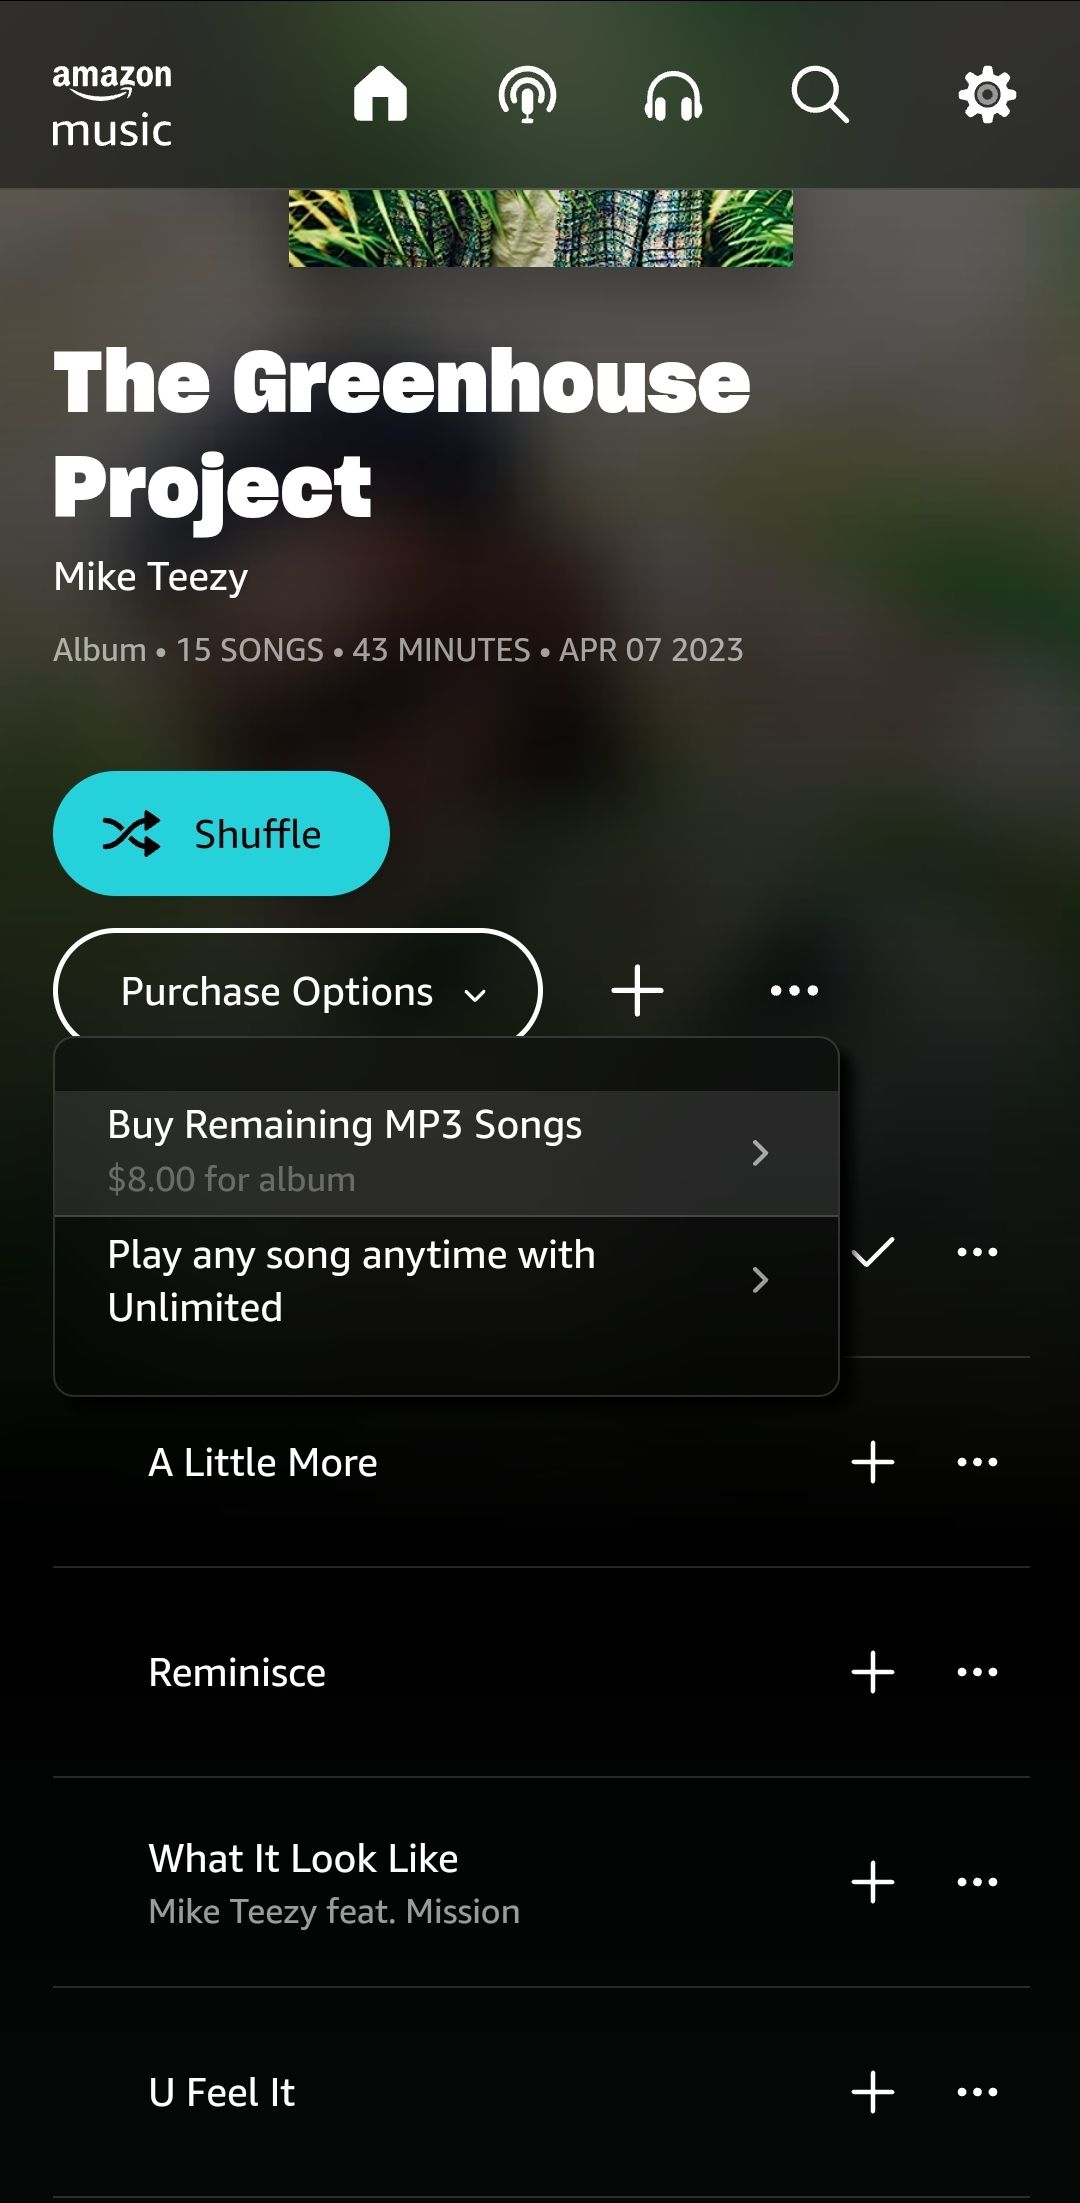 The purchase options on the Amazon Music website in a mobile browser.